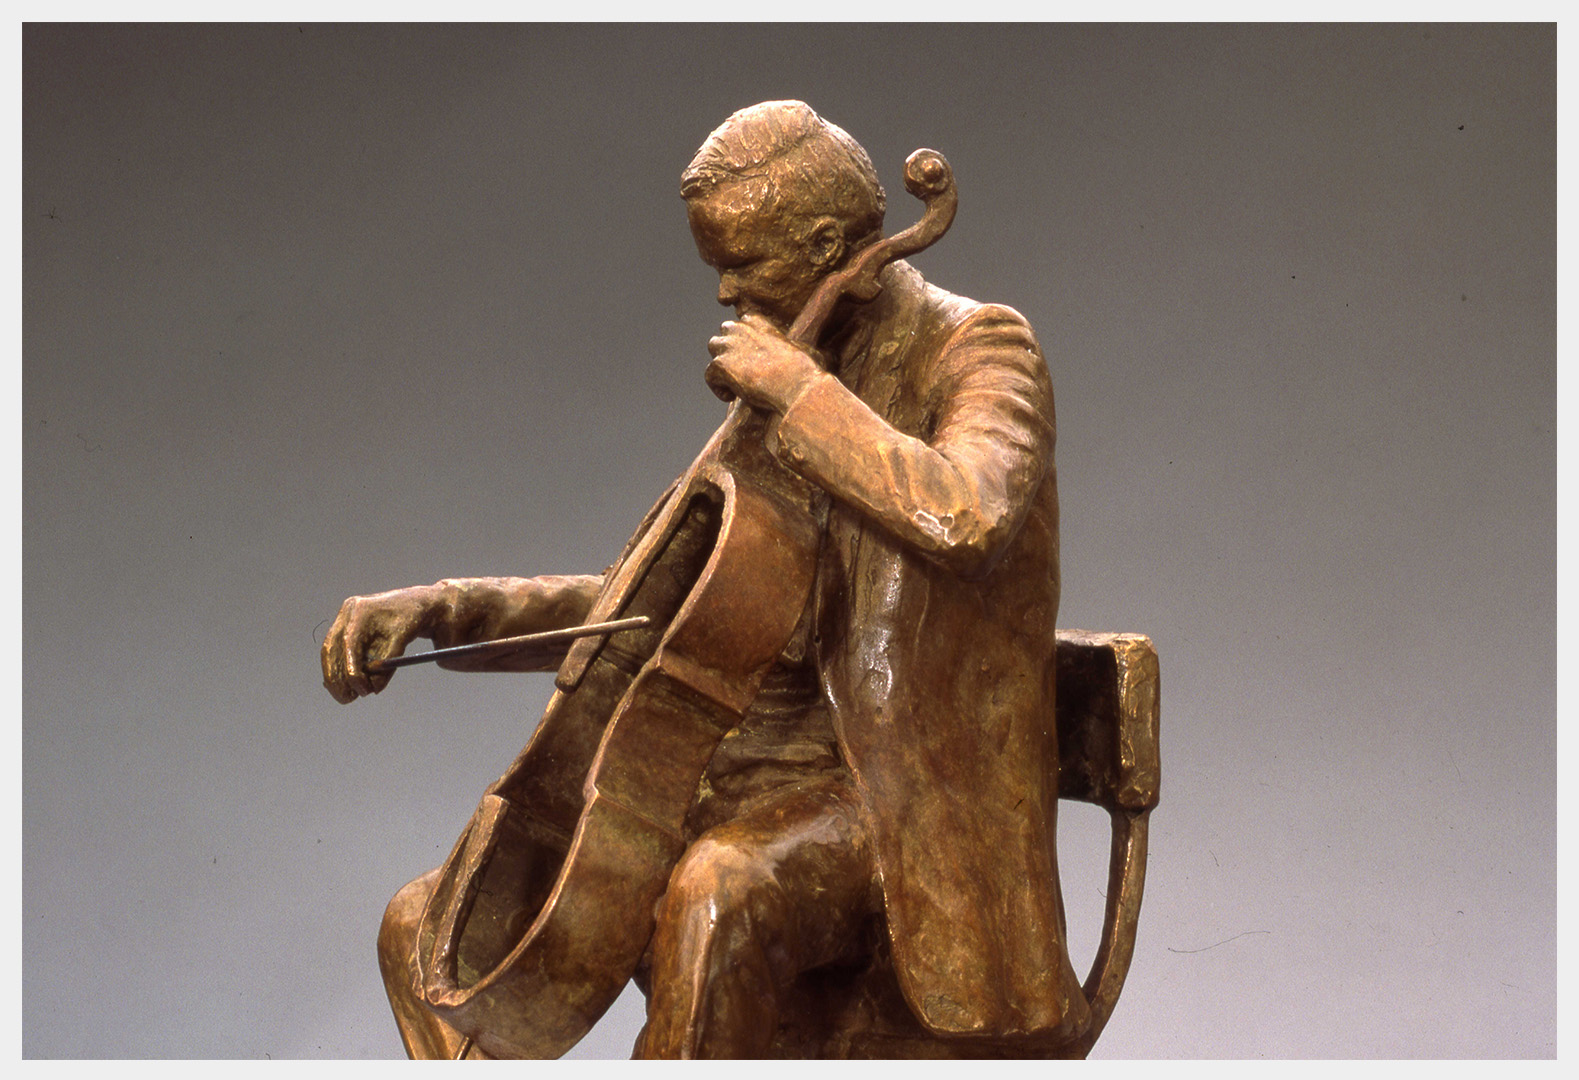 Realistic bronze sculpture life-size of a cellist sitting on a chair playing the outline of a cello with a bow